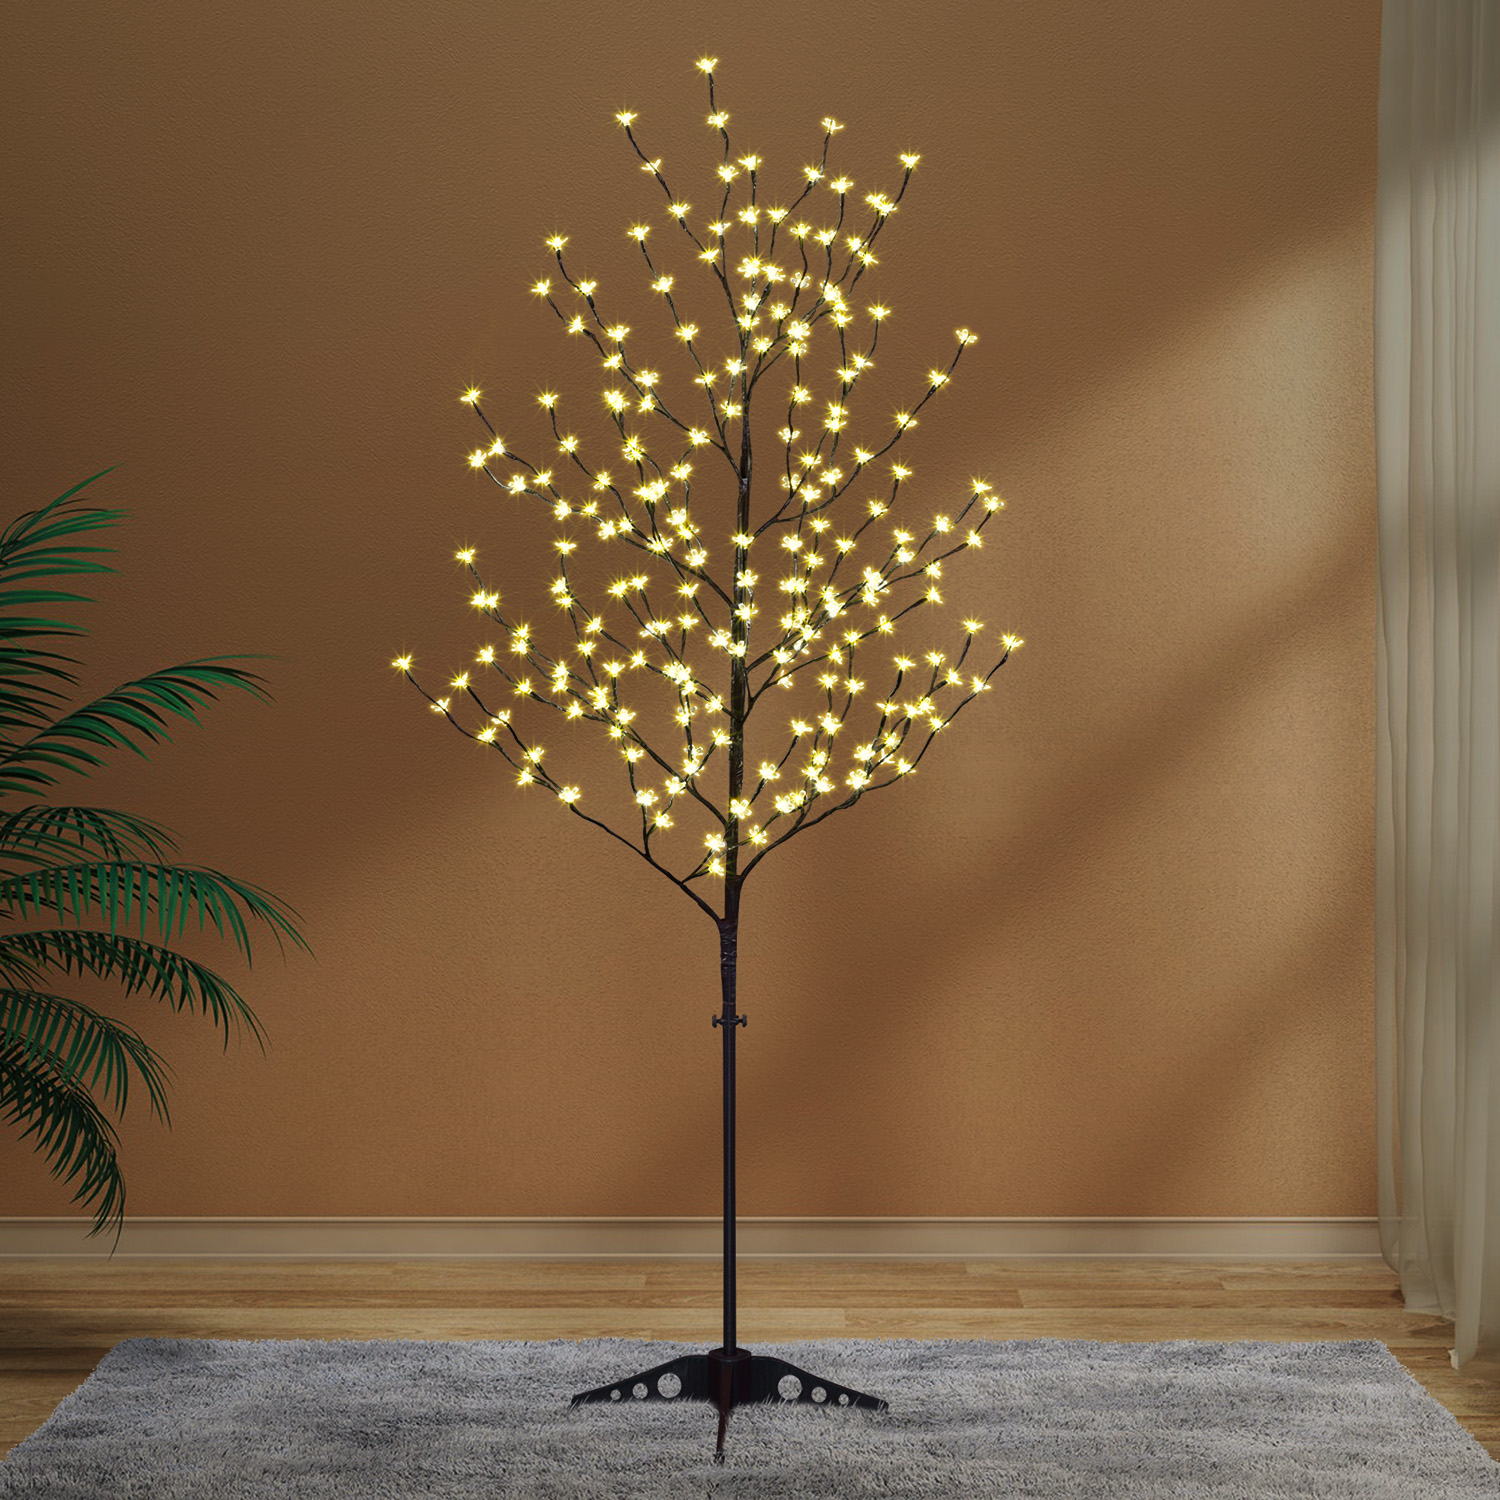 6ft Lighted Cherry Blossom Tree, 208 LED Warm White UL Certified Decoration for Home Christmas Spring Holiday Outdoor and Indoor